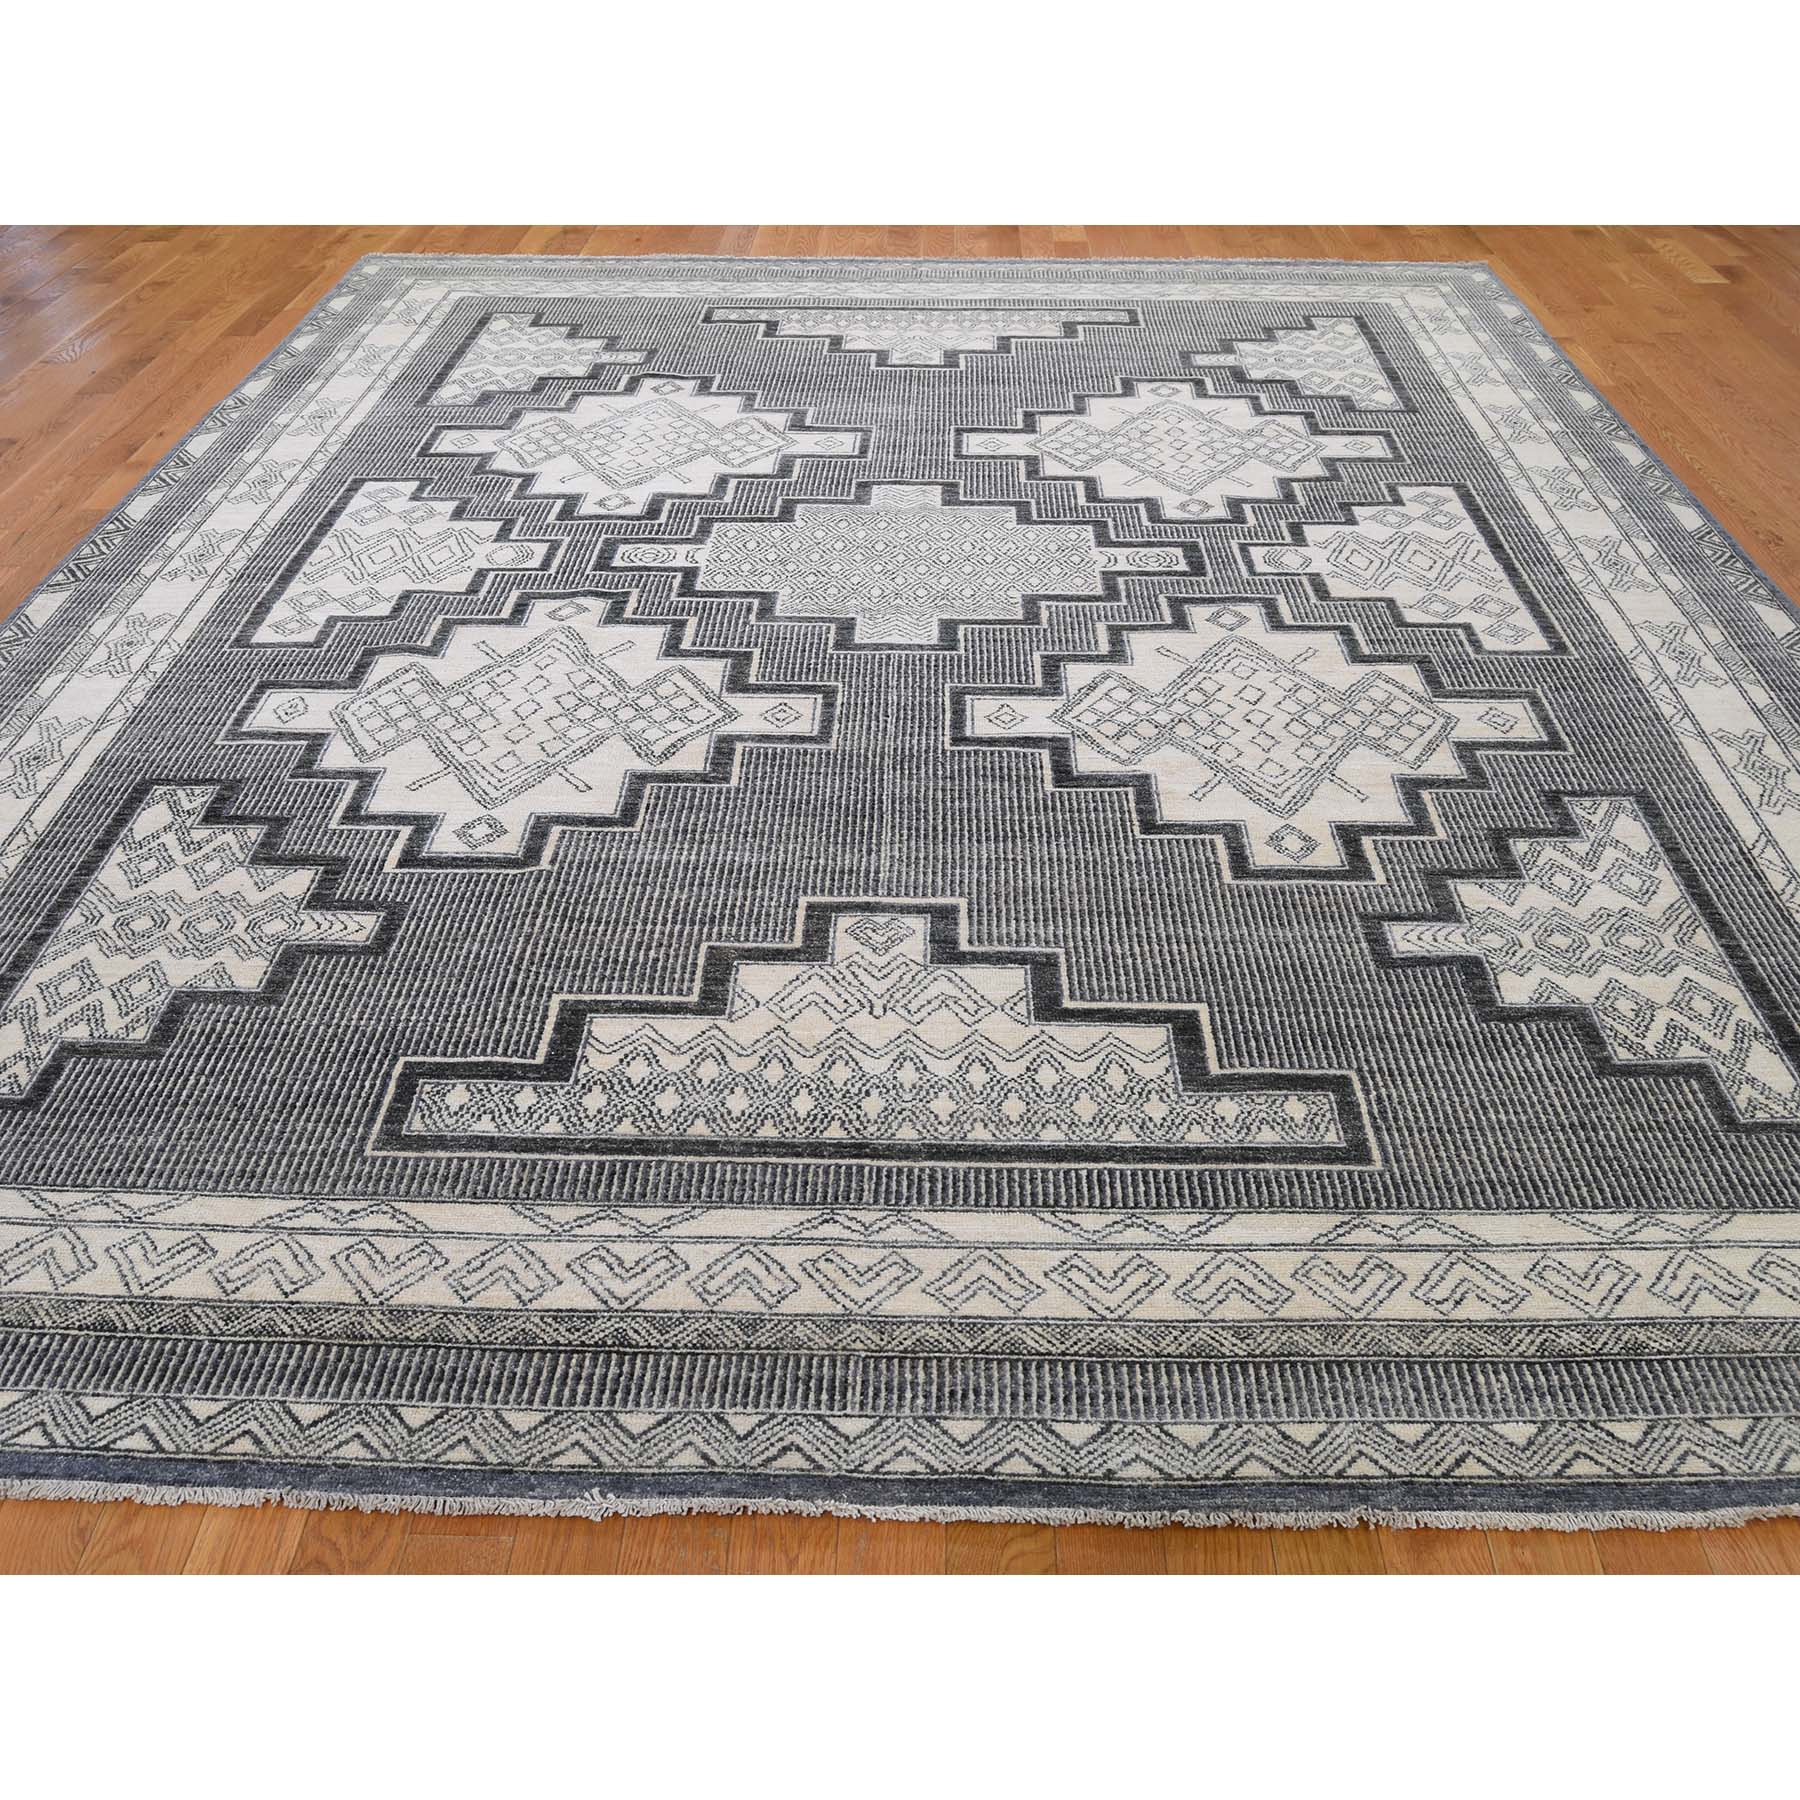 8-10 x12- Hand-Knotted Pure Wool Peshawar with Southwestern Motifs Oriental Rug 